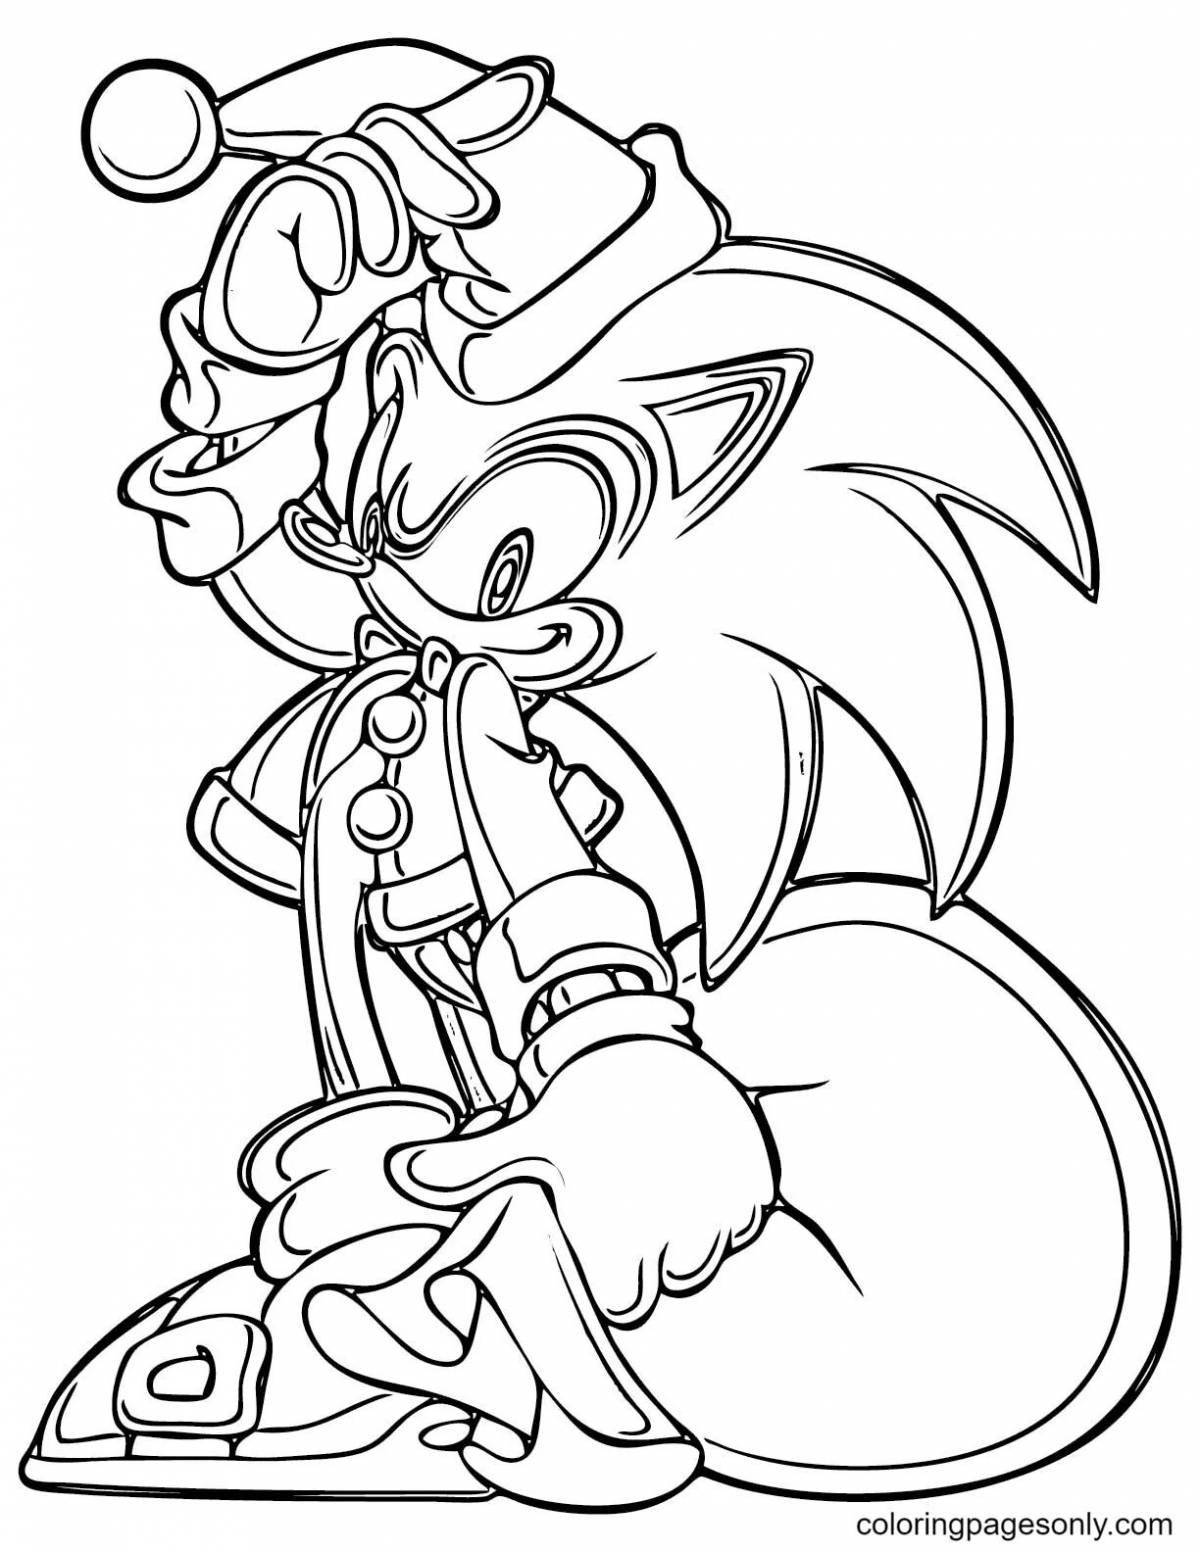 Dazzling sonic shadow coloring page